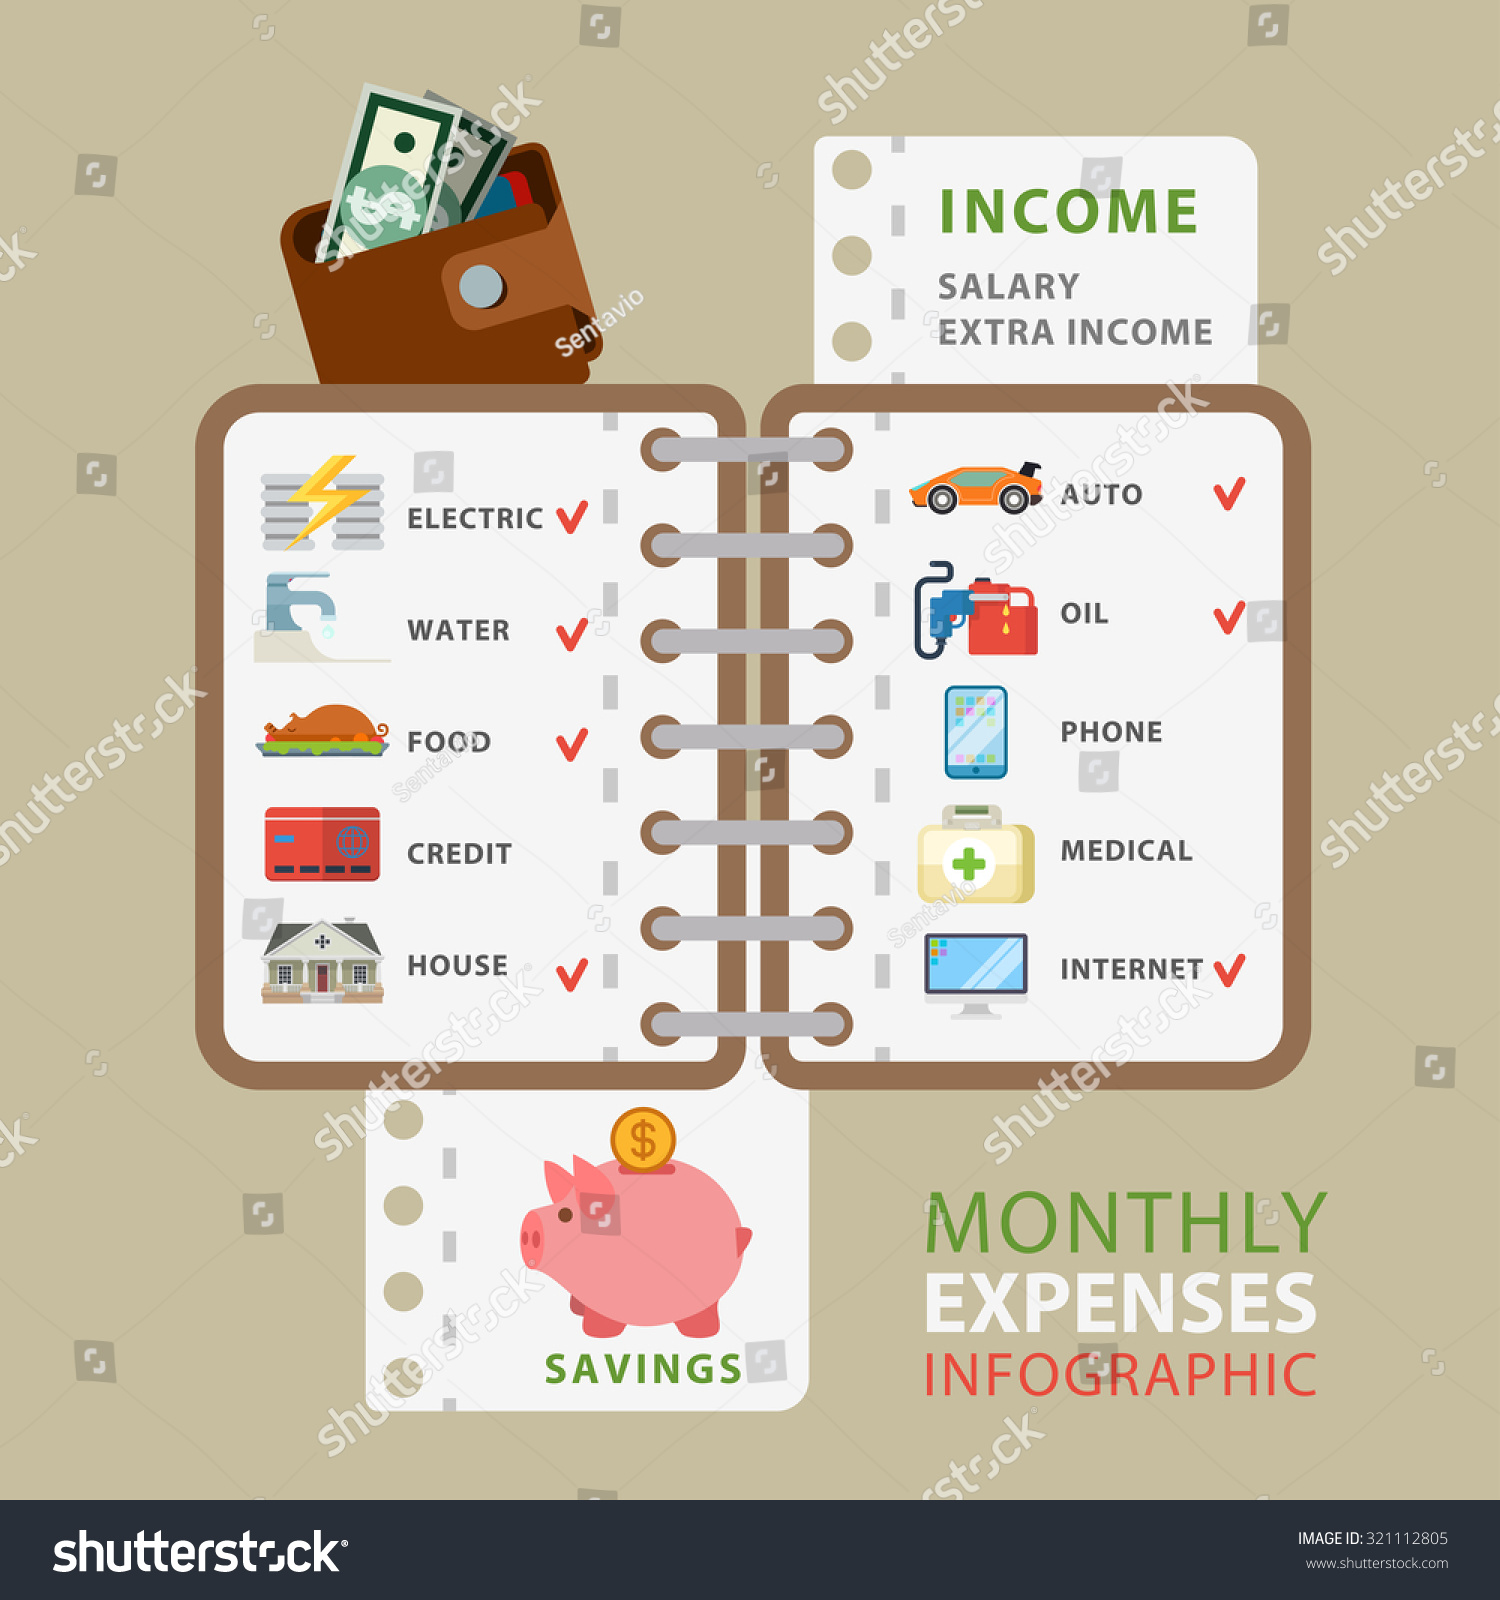 What is a monthly expense list?